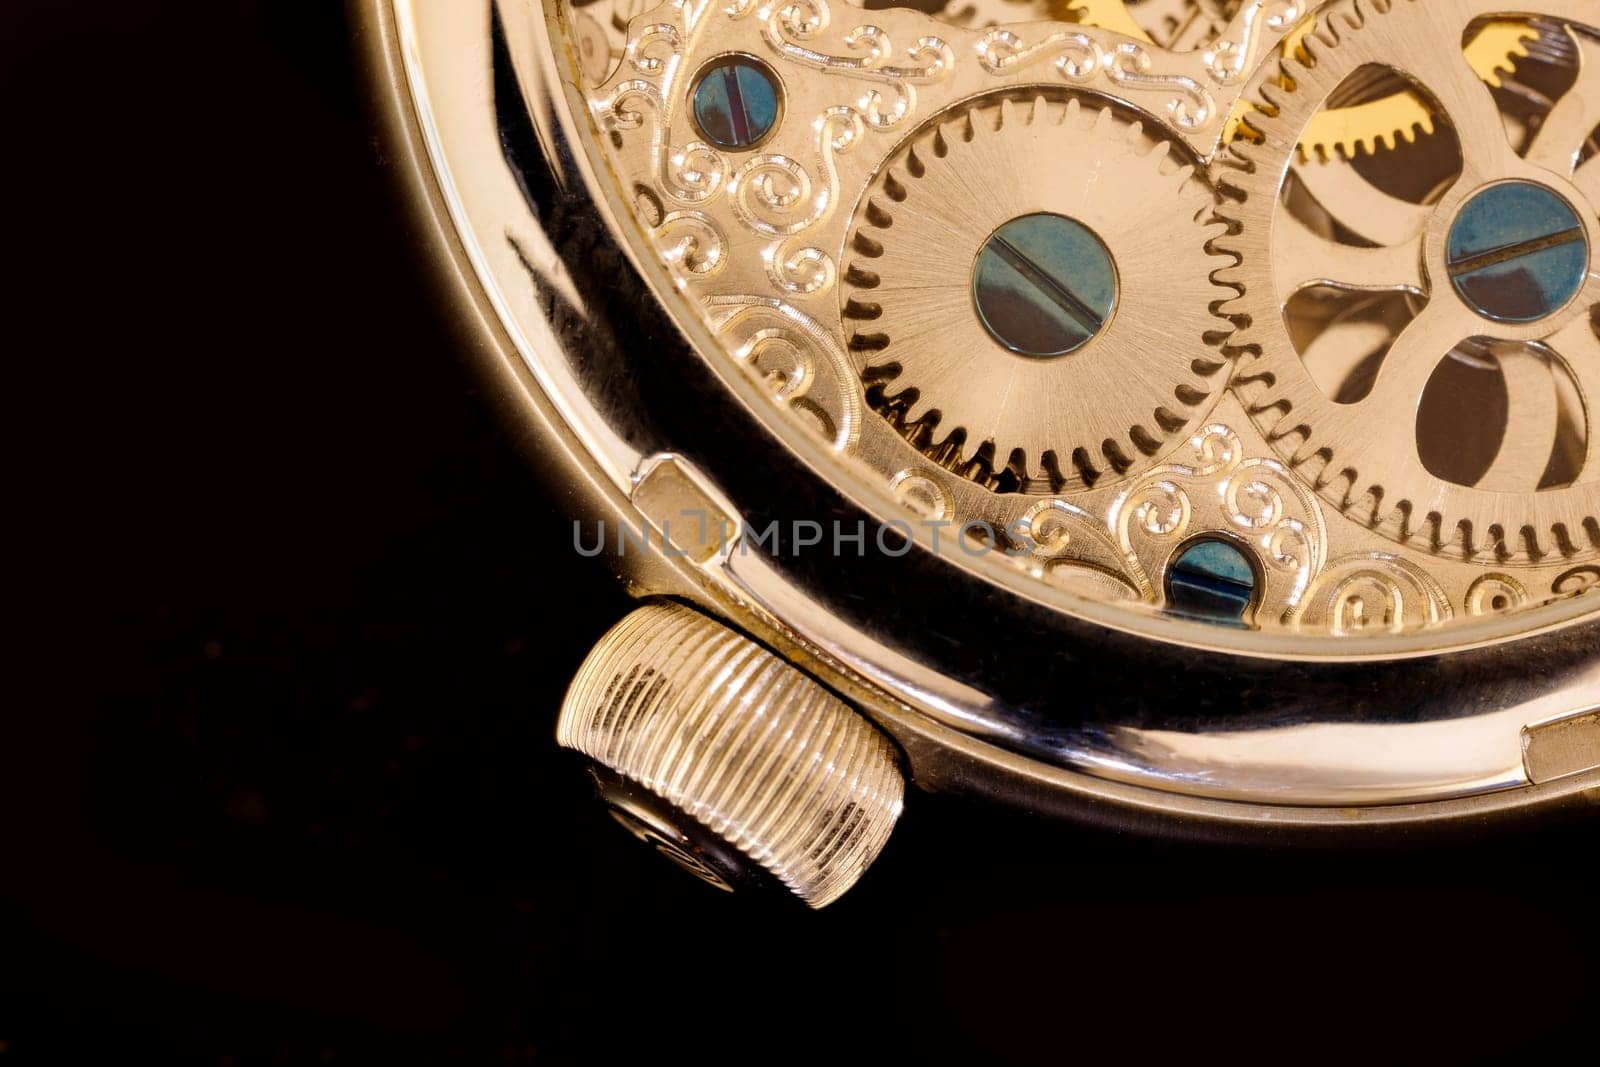 A part of a transparent watch with visible gears